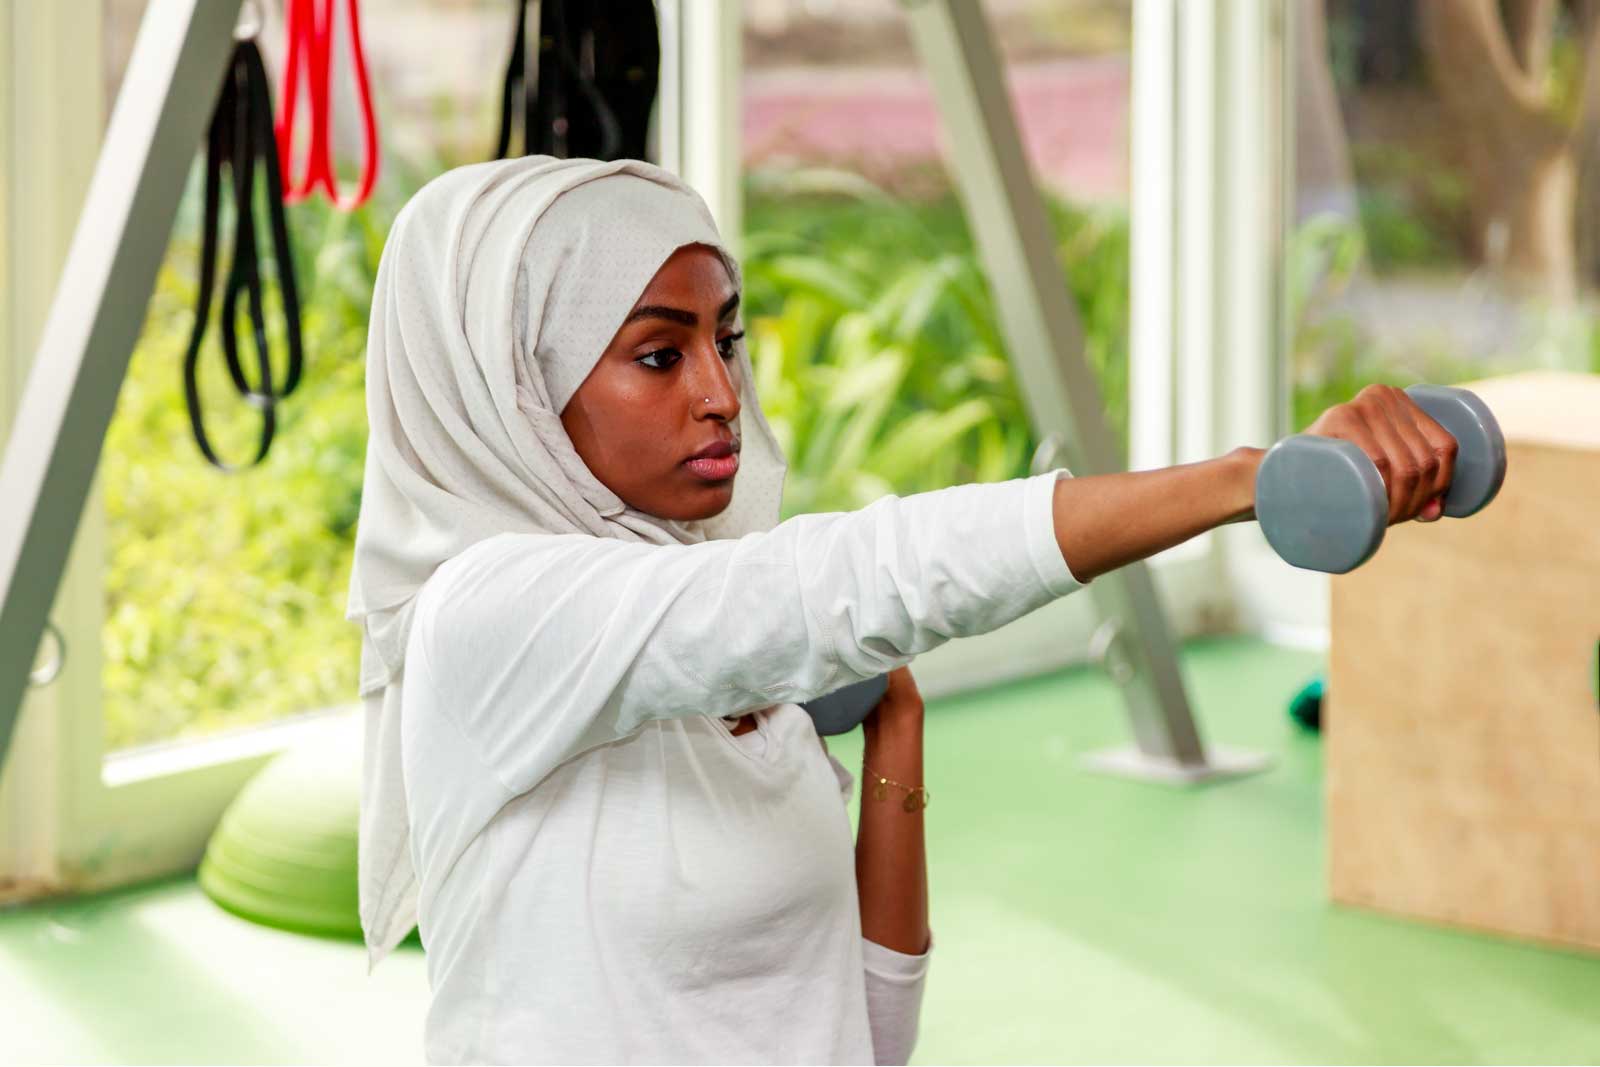 What Is Islam’s Stance on Women’s Practicing Sport?